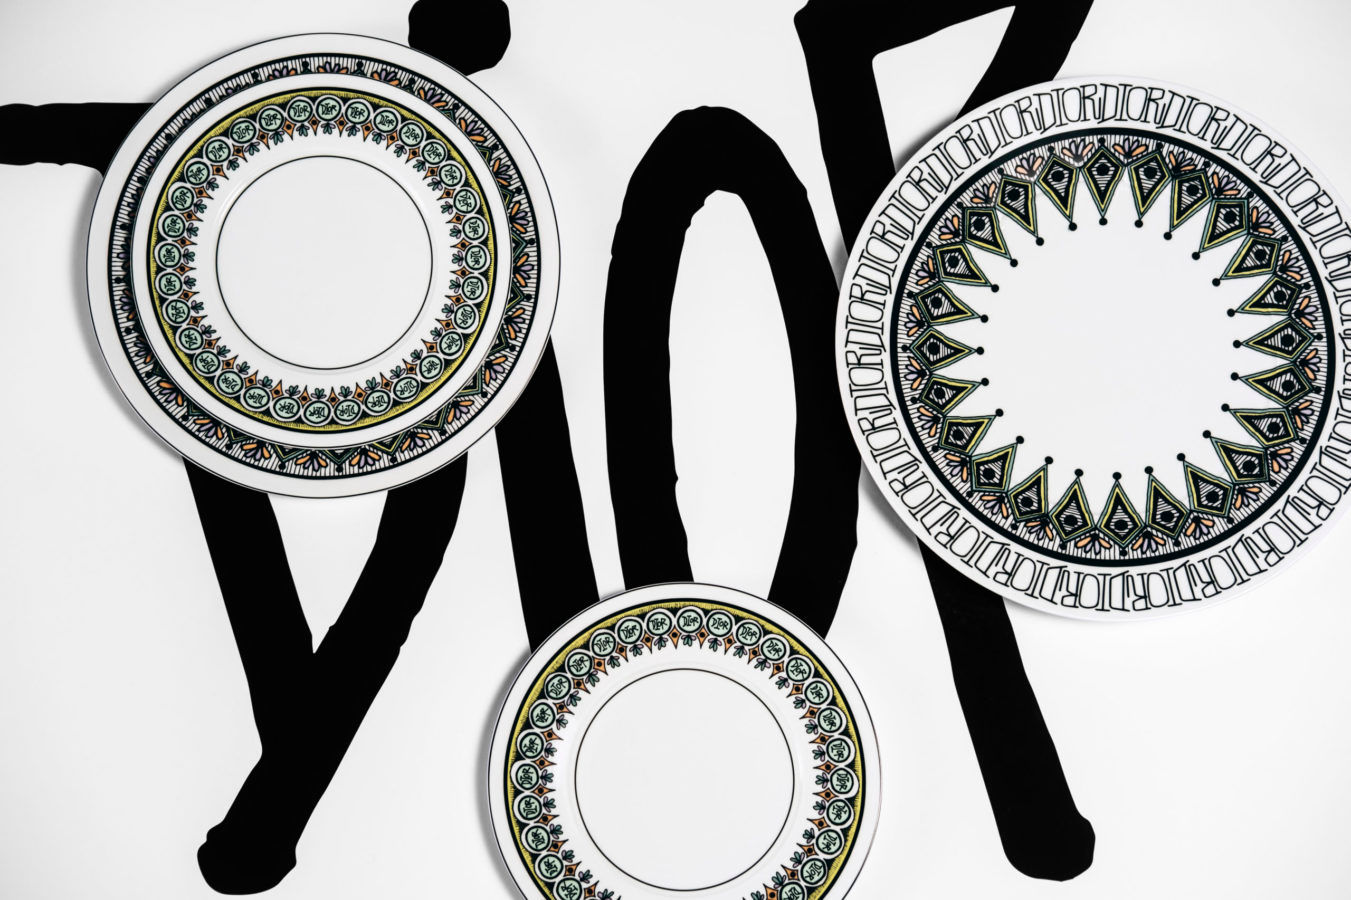 Dior and Shawn Stussy have teamed up on a tableware collection